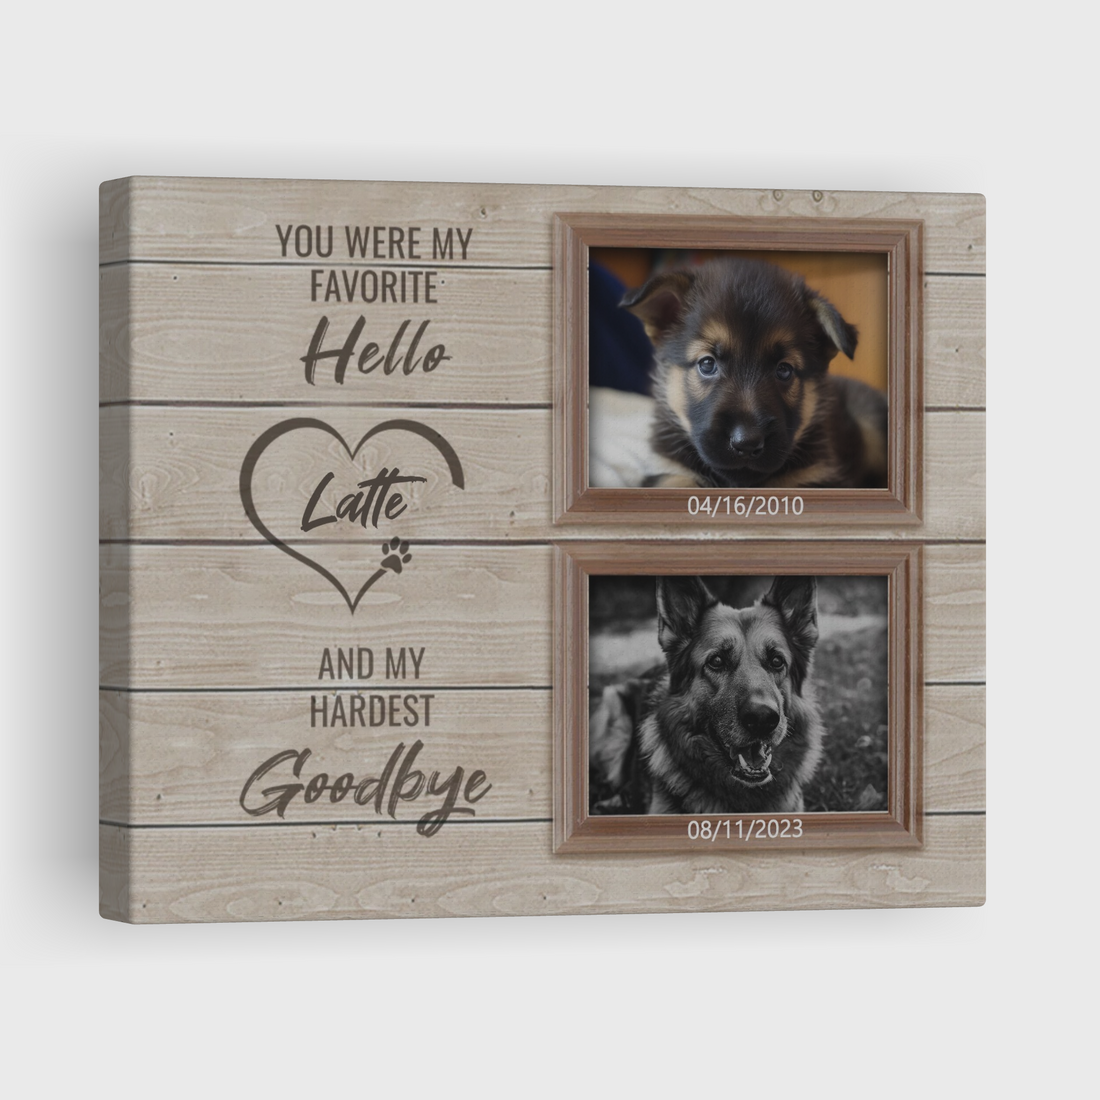 Hello And Goodbye - Personalized Canvas Print Pet Memorial